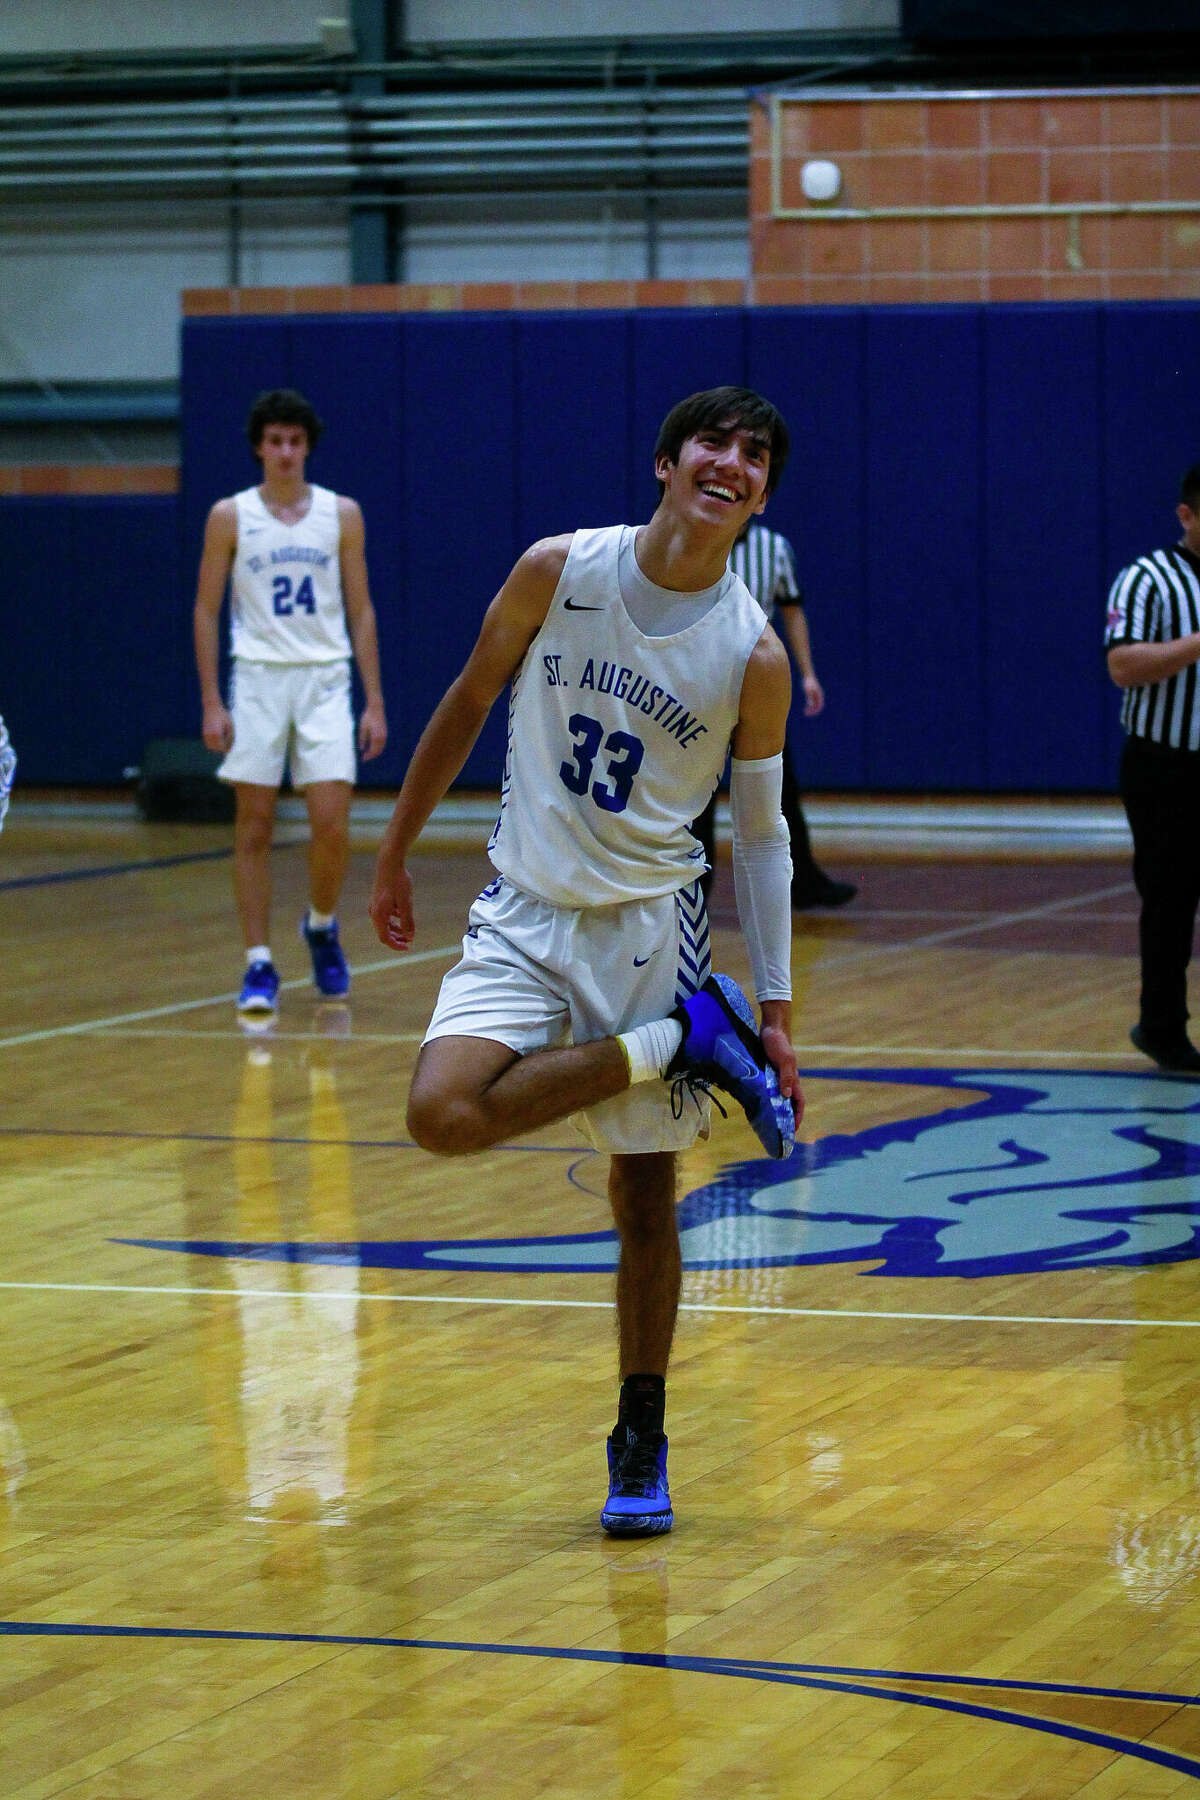 Octavio Benavides scored 20 points as the St. Augustine Knights beat the Cigarroa Toros on Friday.